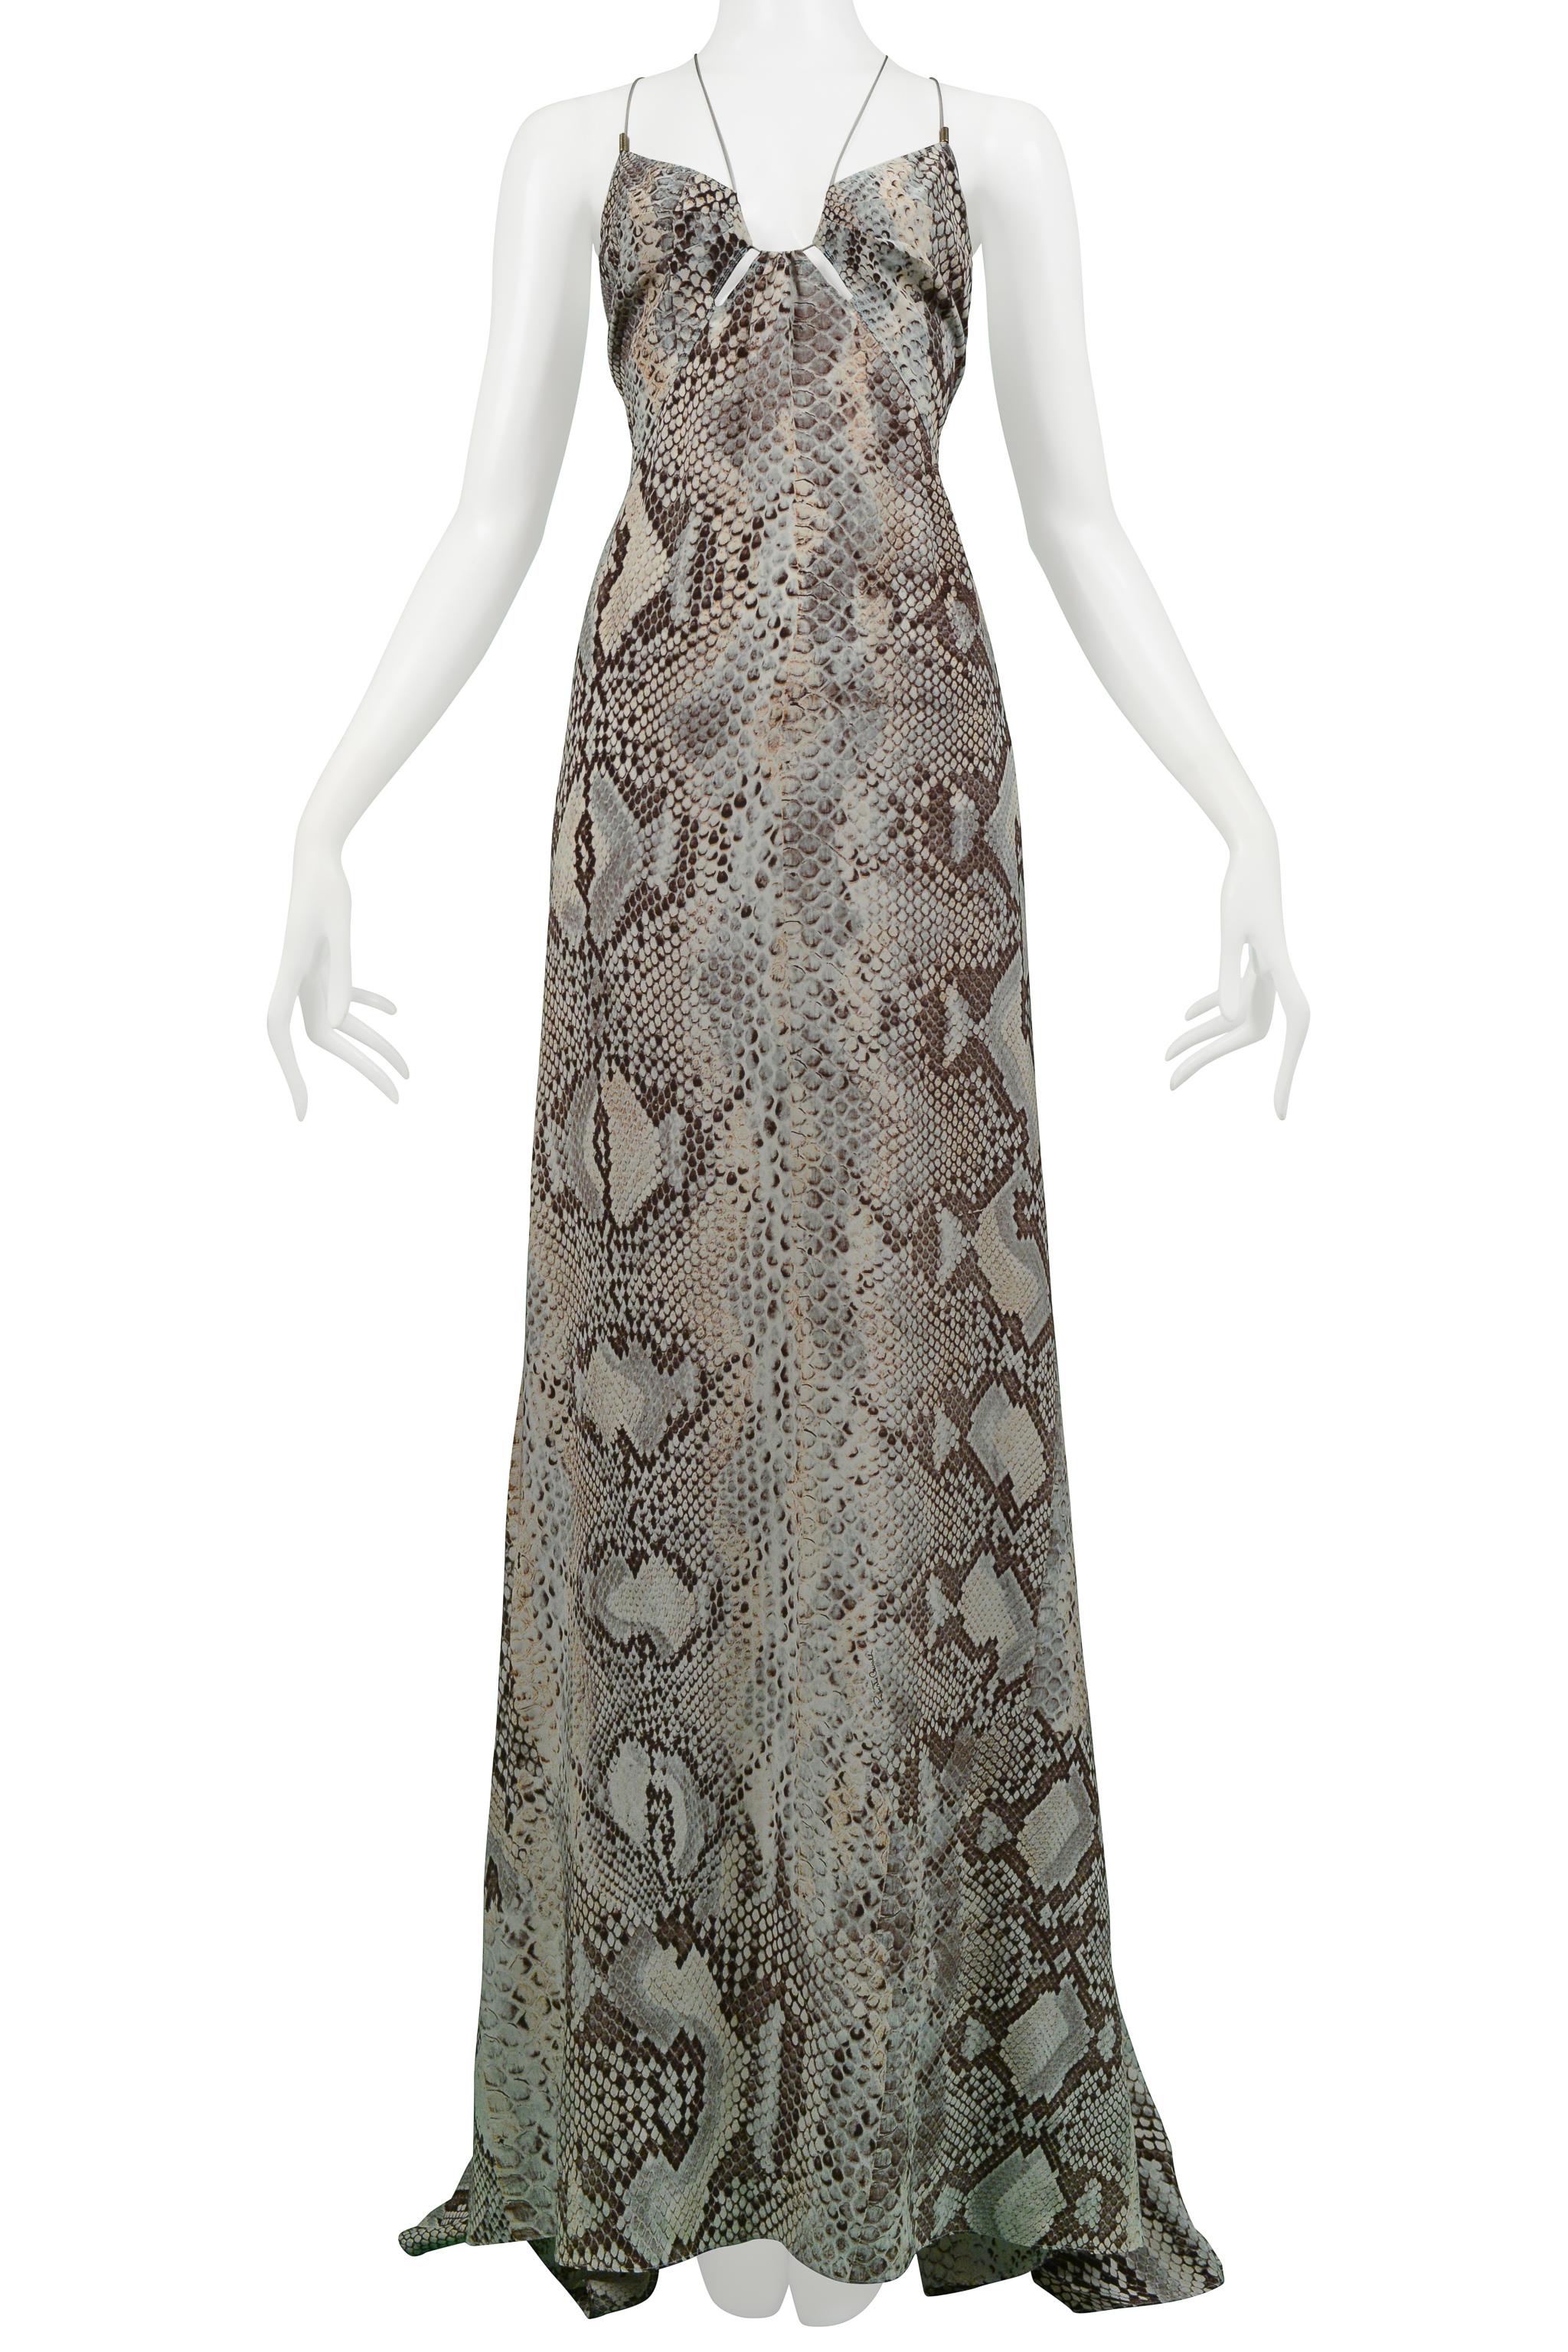 Roberto Cavalli Blue & Grey Snake Print Evening Gown With Silver Hardware 2011 In Excellent Condition For Sale In Los Angeles, CA